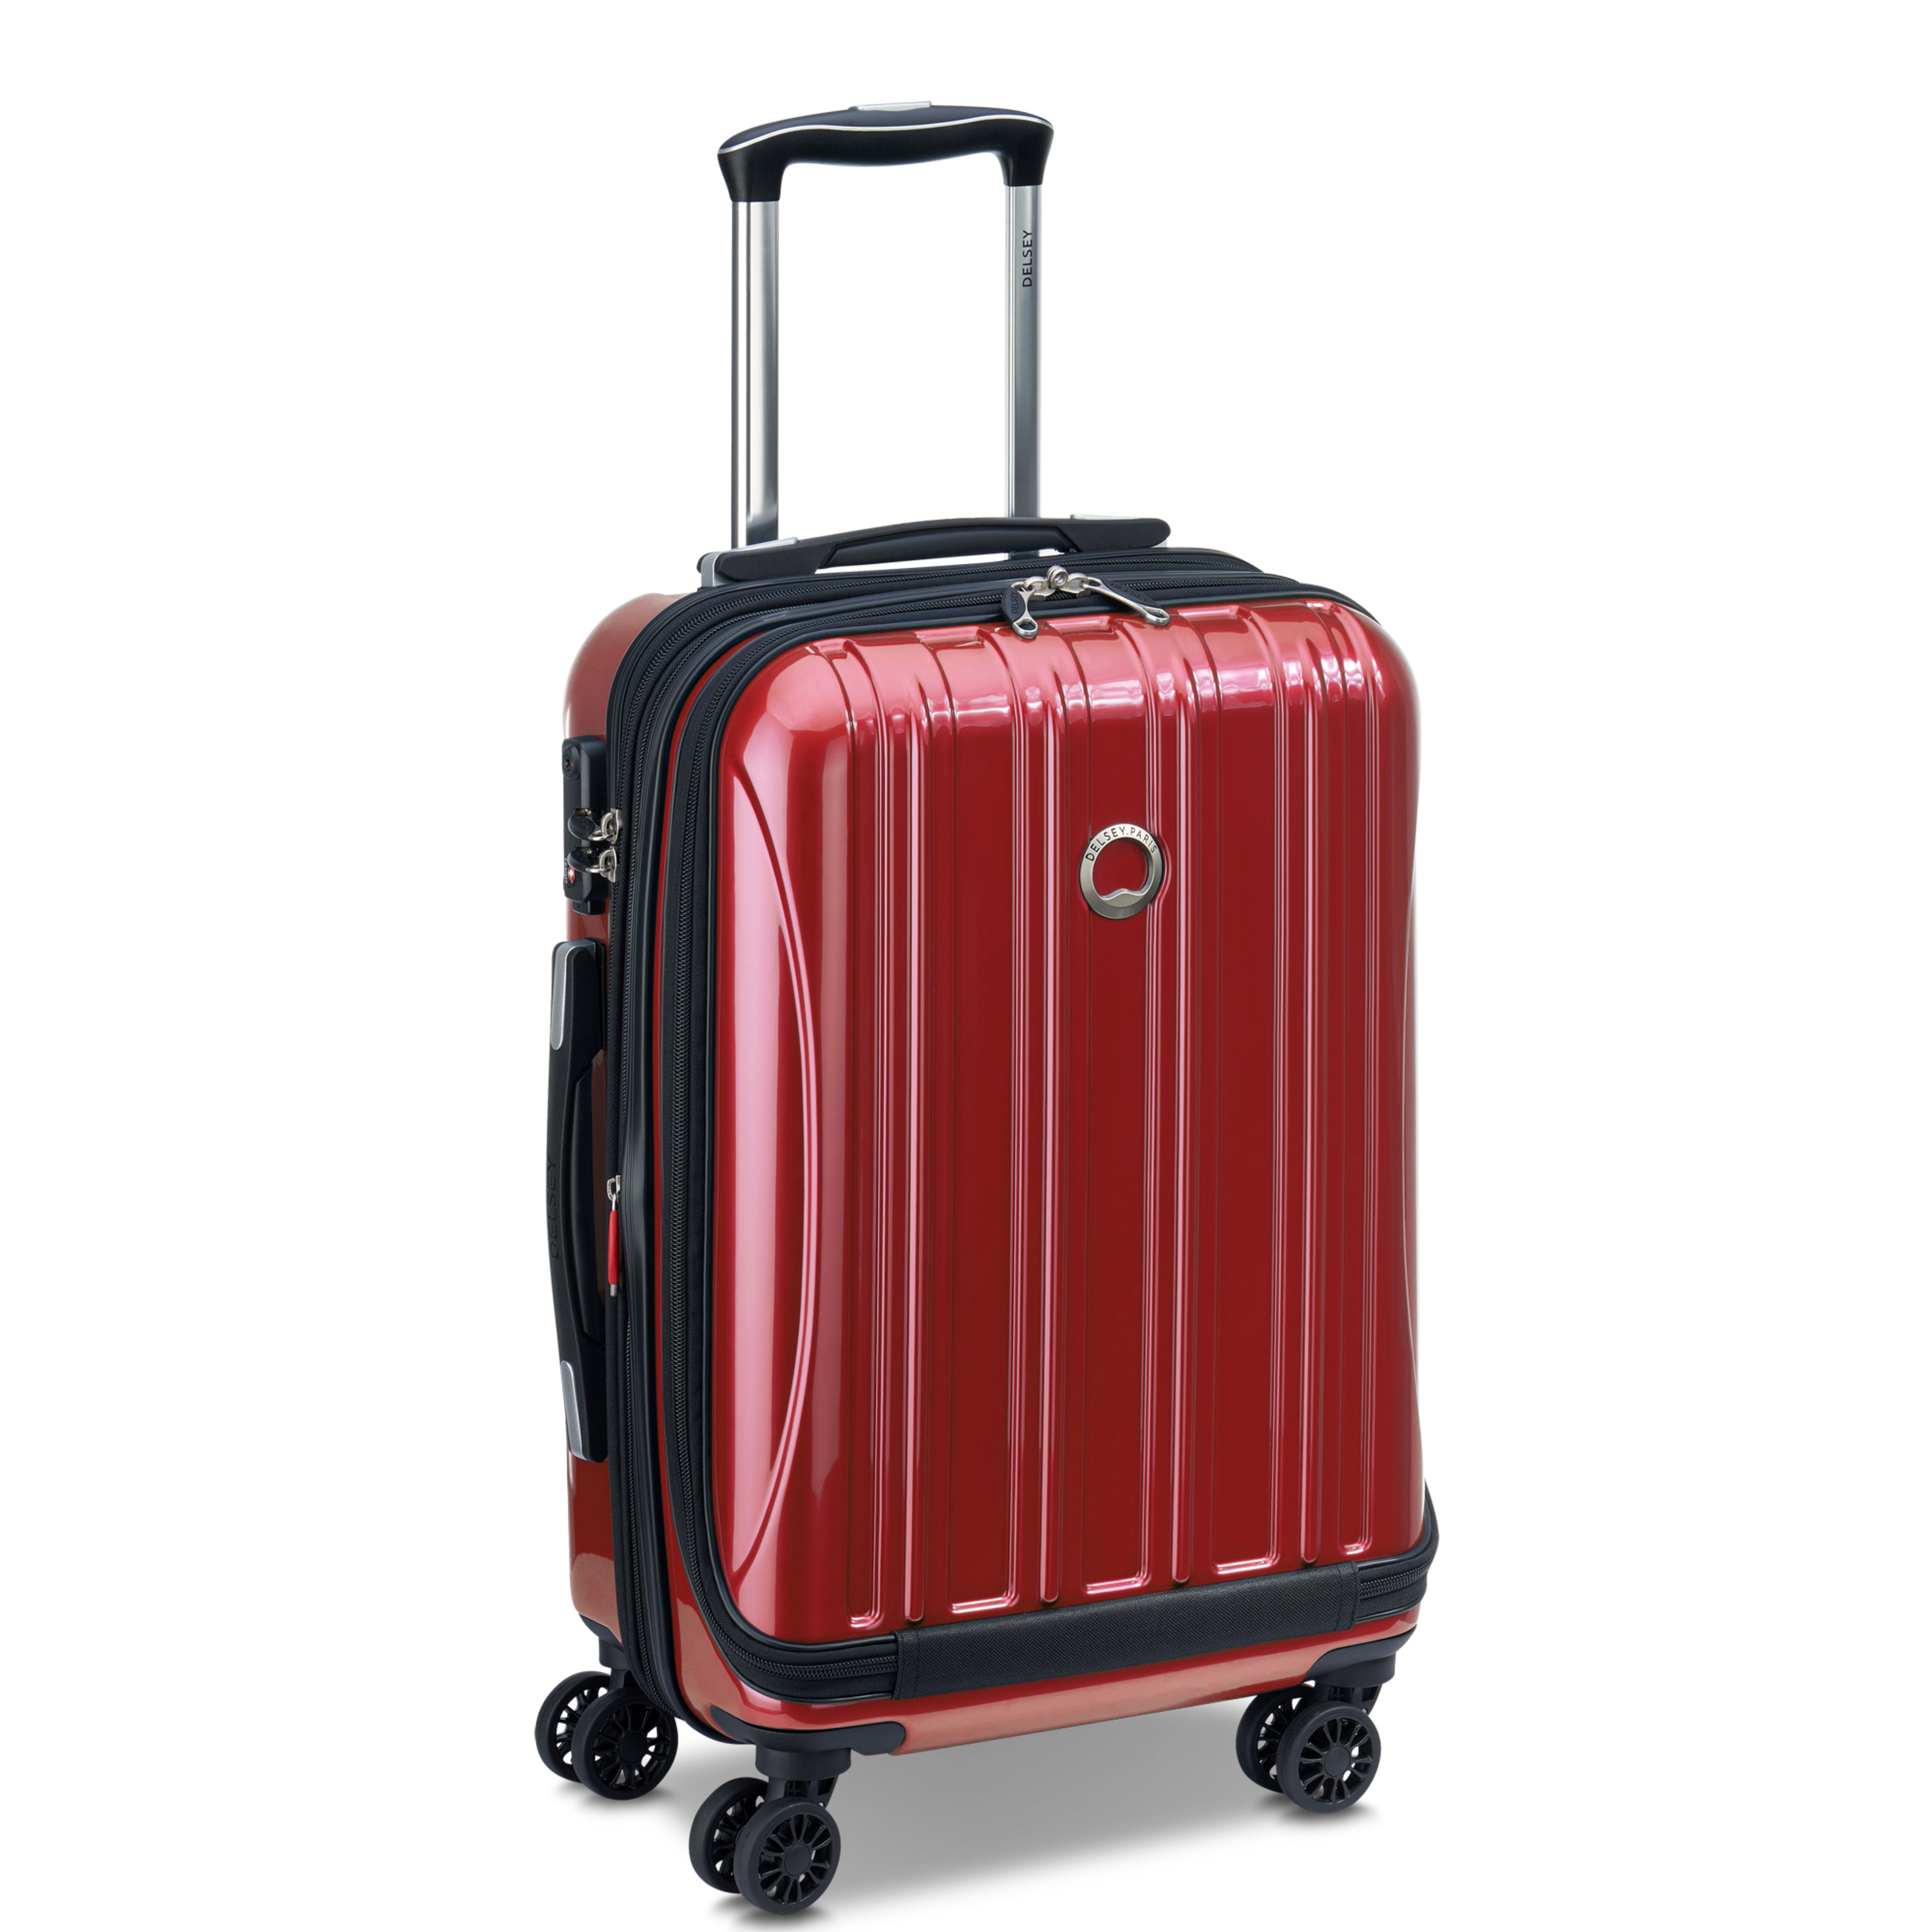 DELSEY PARIS Helium Aero 19" Hardside Expandable Spinner Carry-On Luggage, Red - image 1 of 8